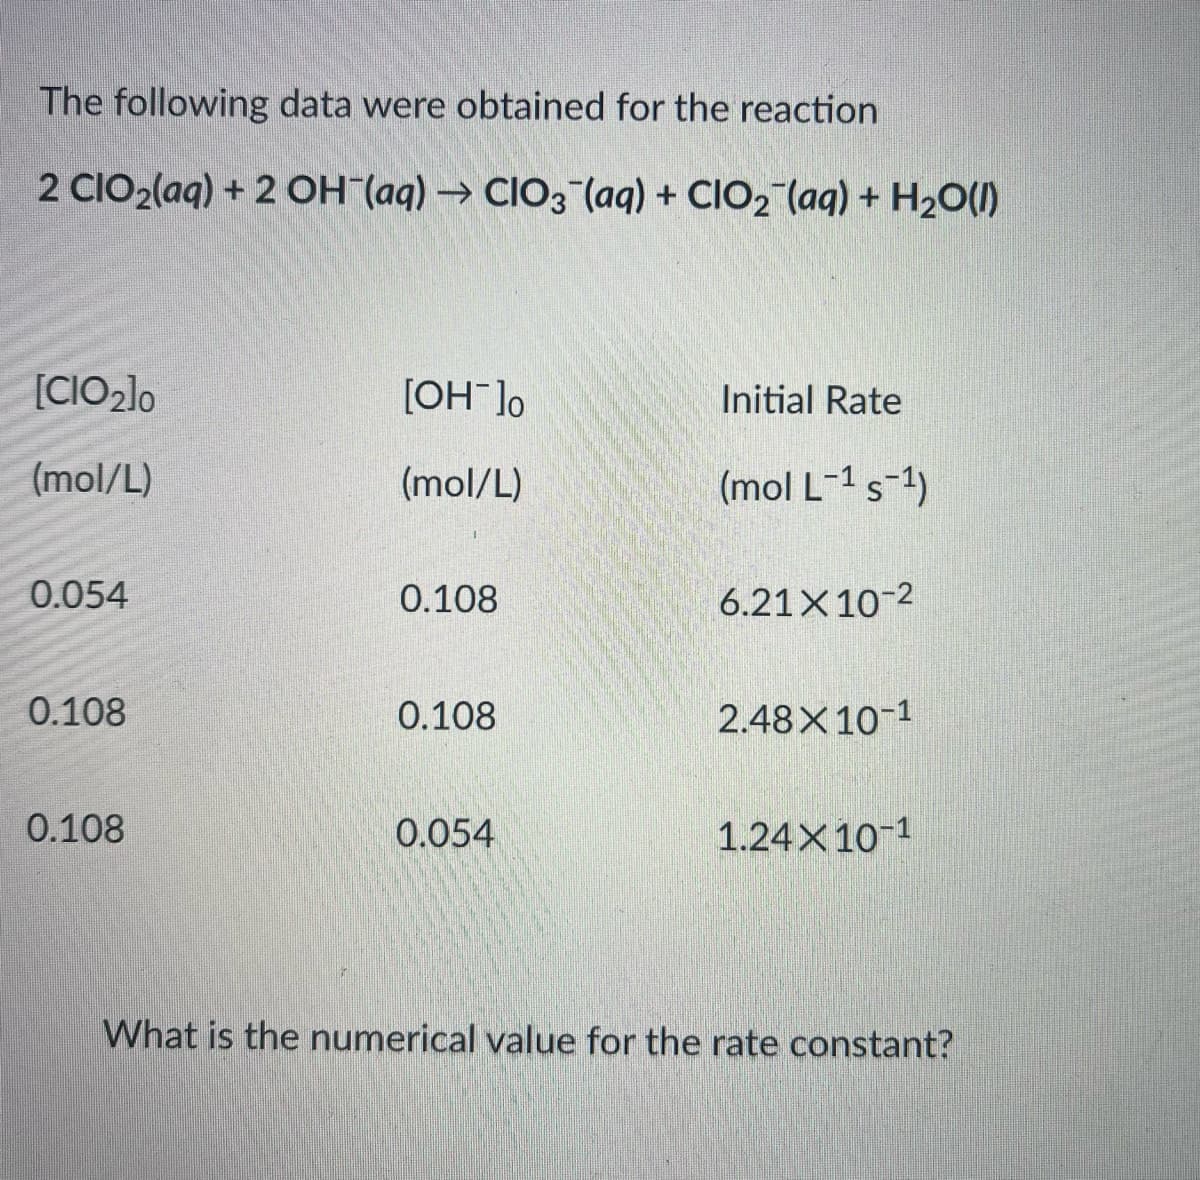 The following data were obtained for the reaction
2 CIO₂(aq) + 2 OH(aq) → CIO3(aq) + ClO₂ (aq) + H₂O(l)
[CIO₂]0
[OH-]o
Initial Rate
(mol/L)
(mol/L)
(mol L-1 s-¹)
0.054
0.108
6.21X10-2
0.108
0.108
2.48X10-1
0.108
0.054
1.24X10-1
What is the numerical value for the rate constant?